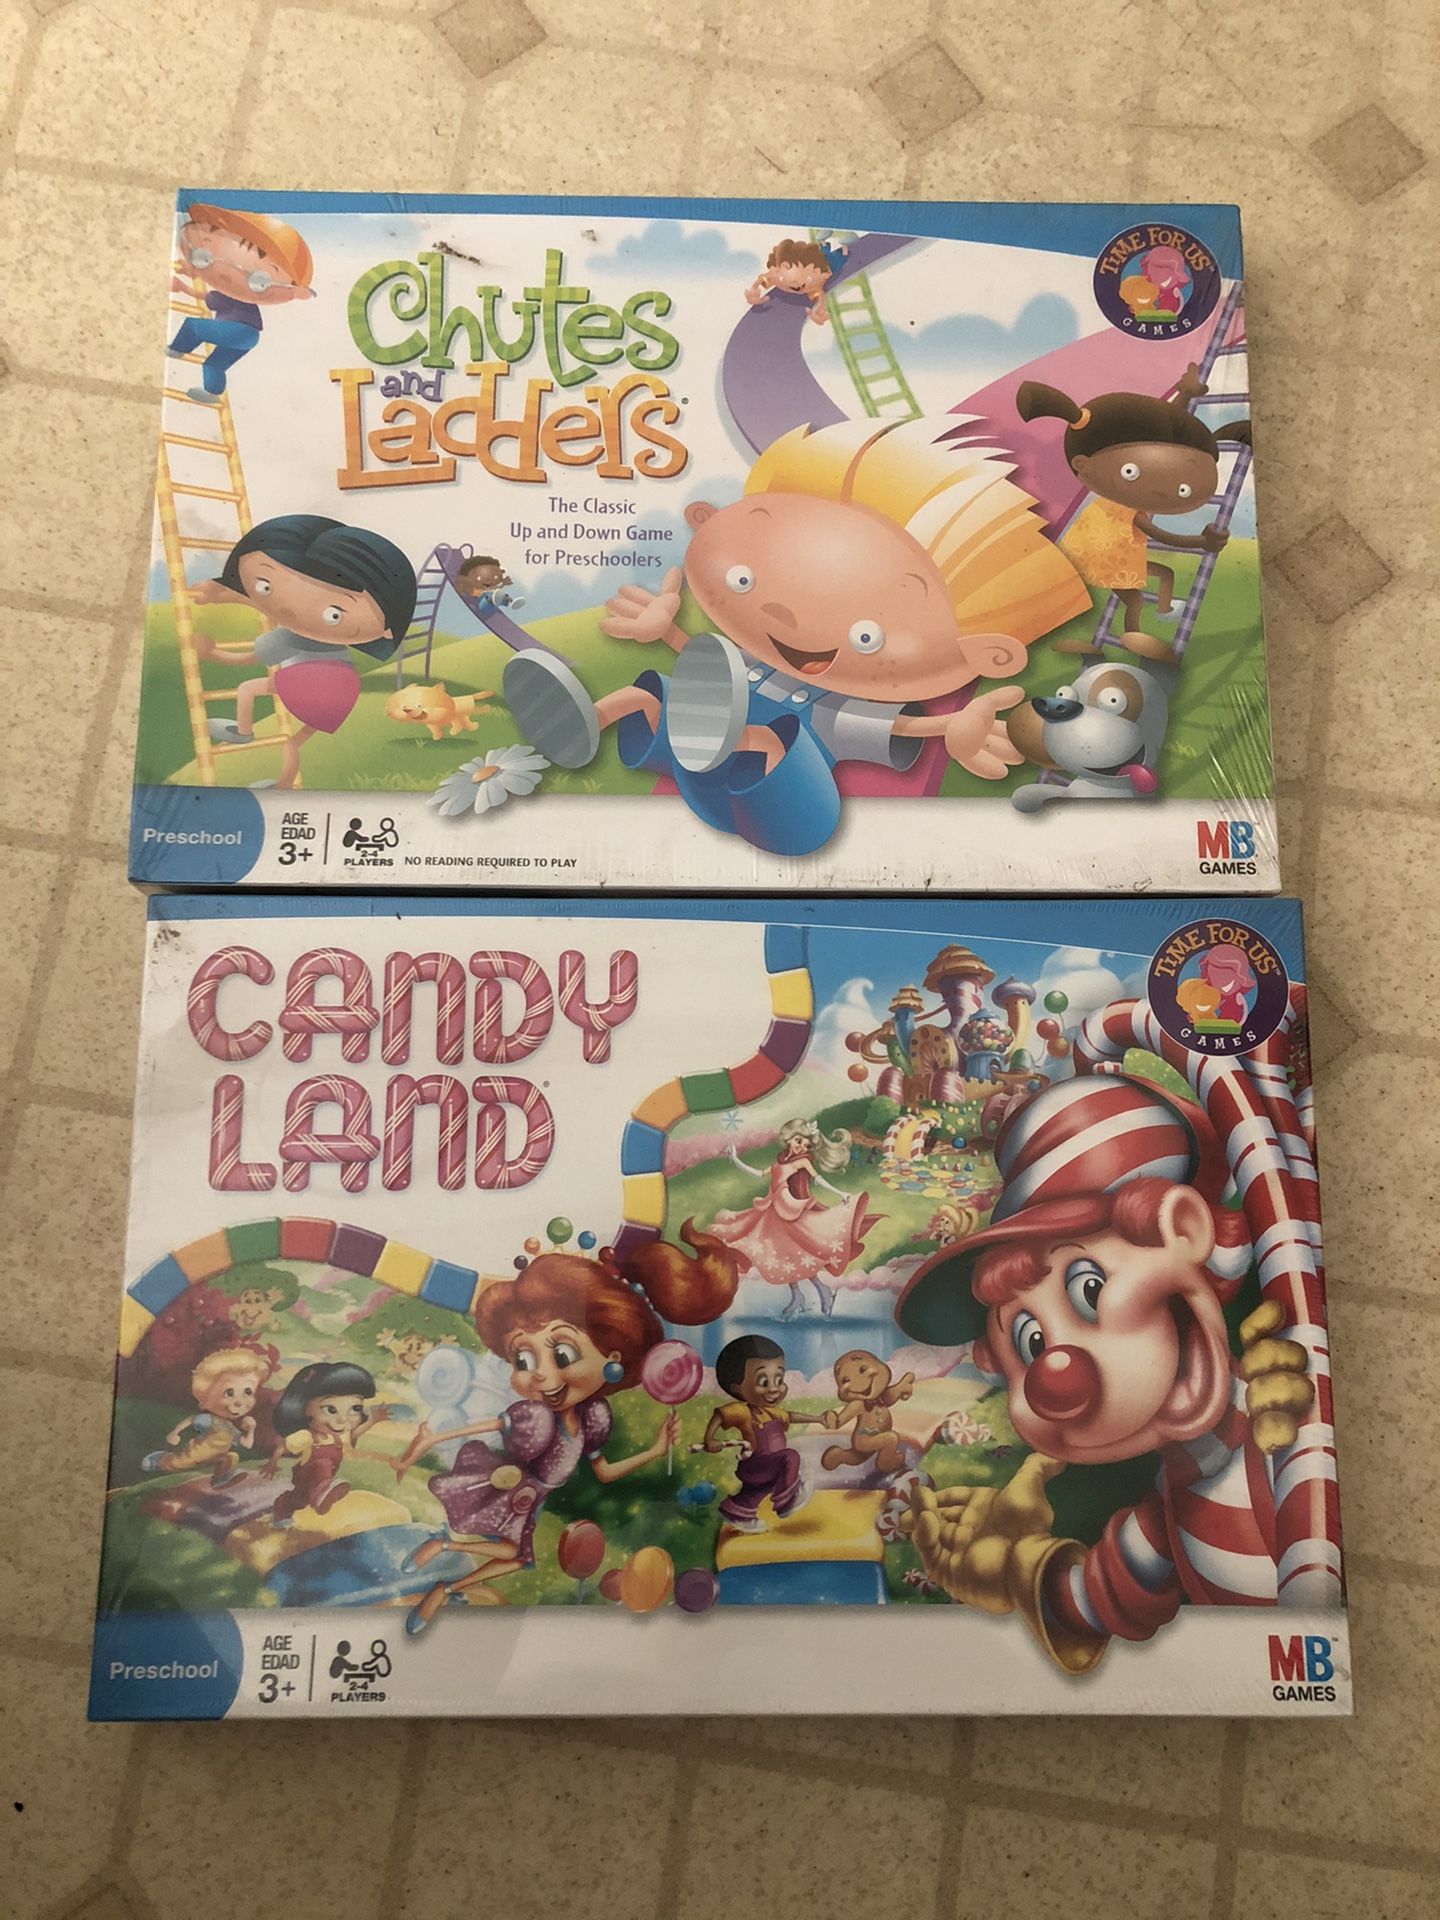 New board games Chutes and Ladders and Candy Land preschool aged